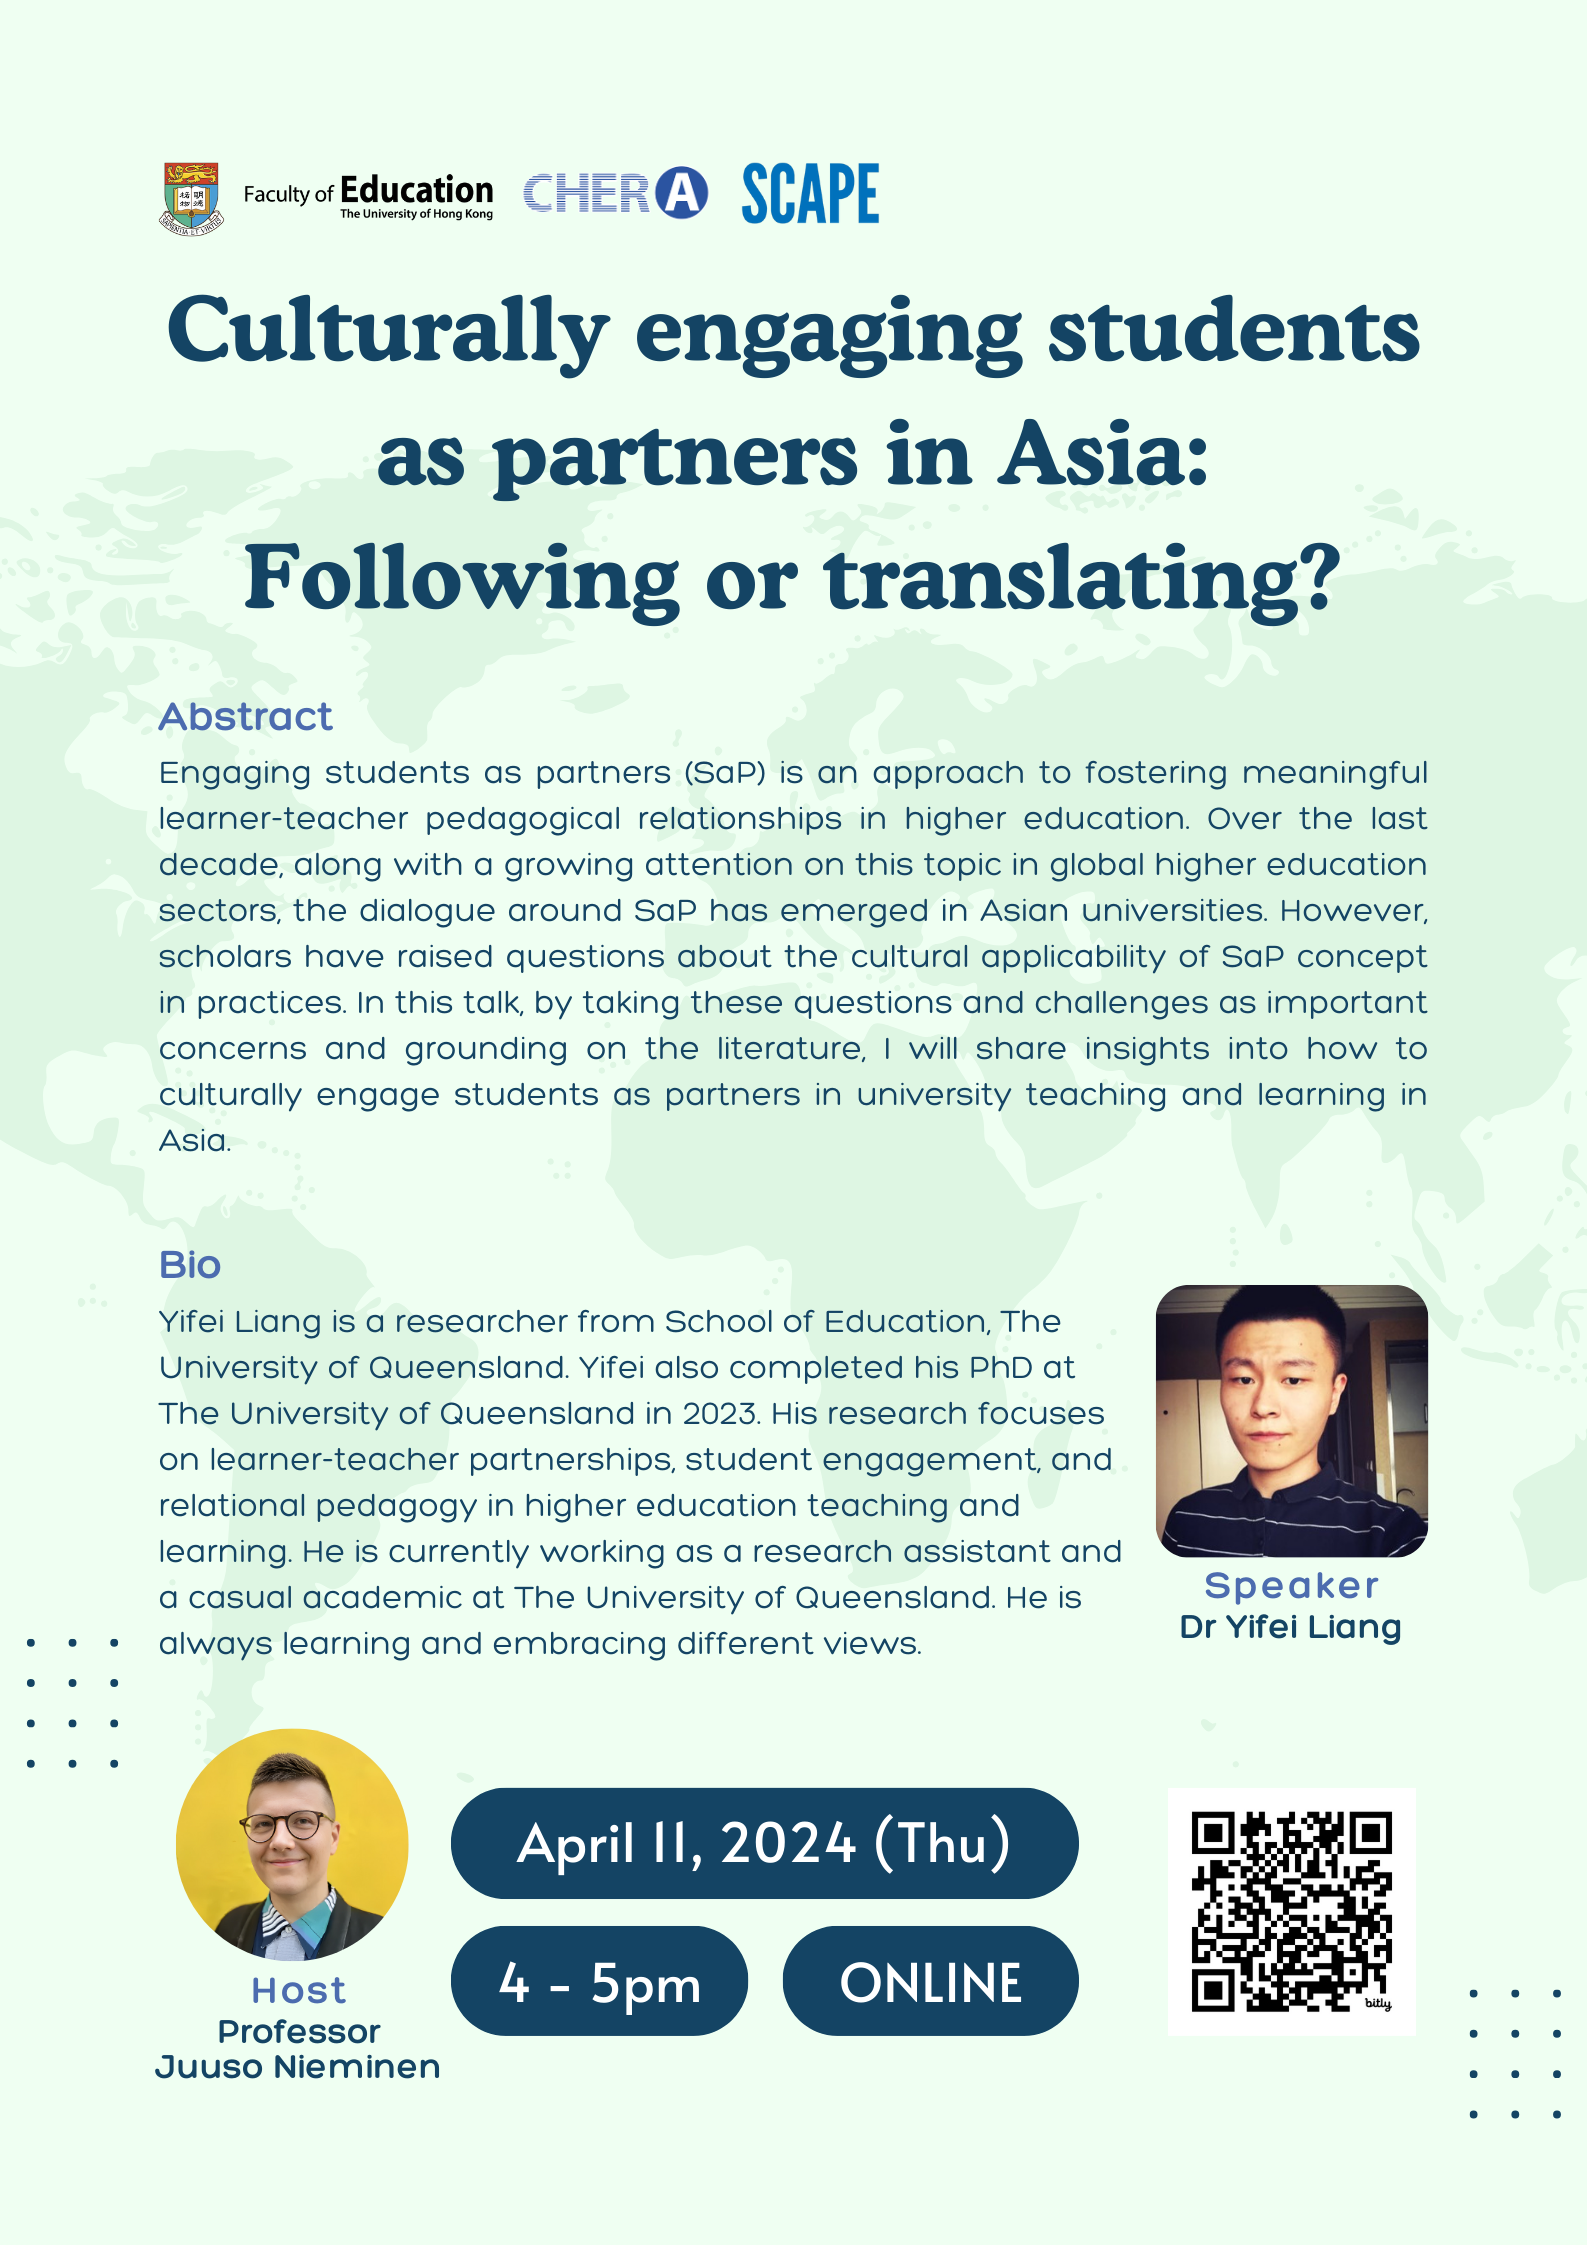 *[April 11, 2024] Culturally Engaging Students as Partners in Asia: Following or Translating?